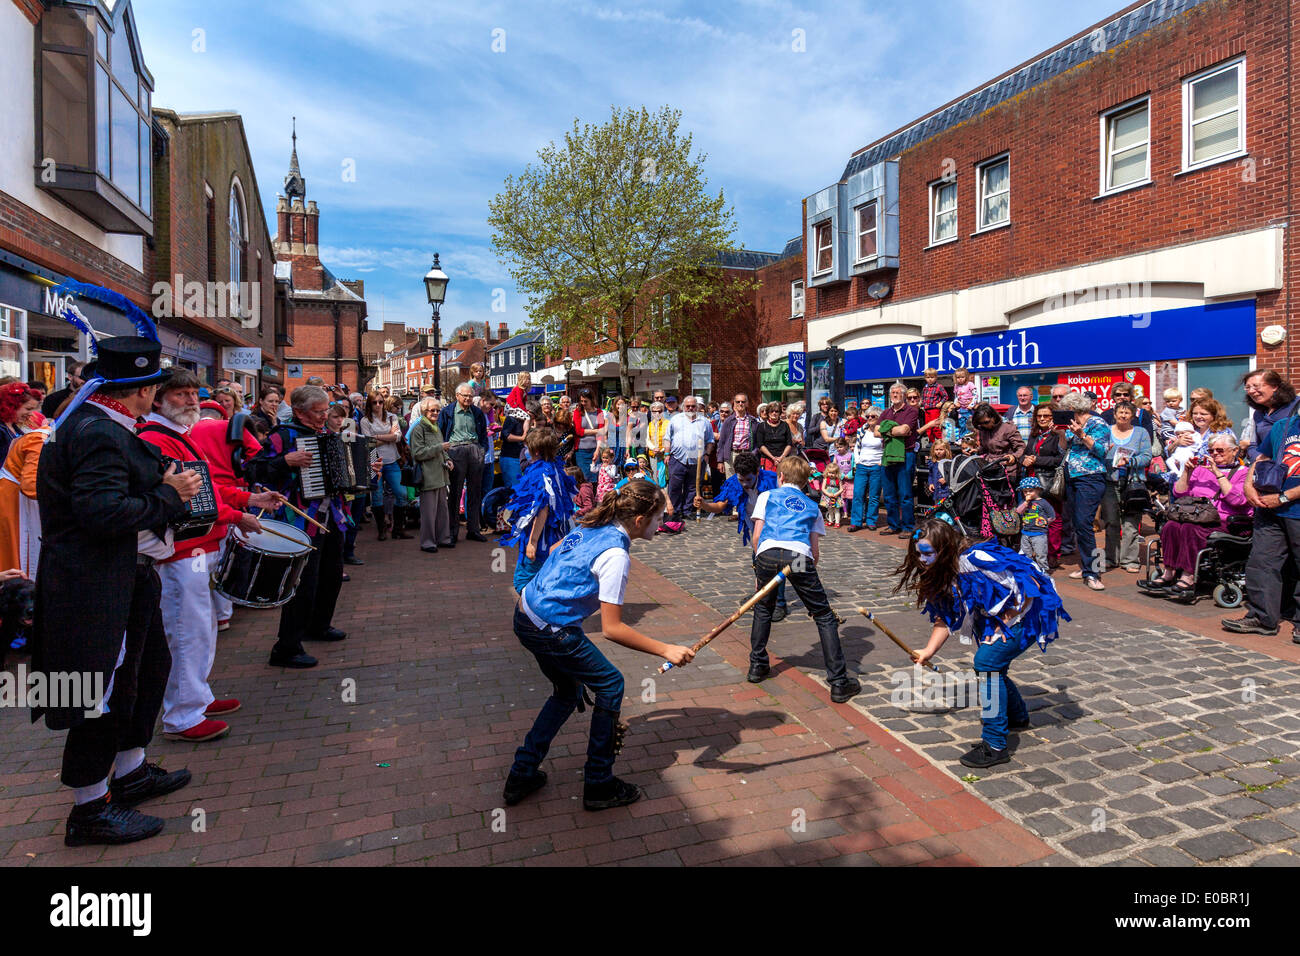 The Plumpton Black Brook Childrens Morris Dancers Perform In The Precinct, Lewes, Sussex, England (May Day 2014) Stock Photo